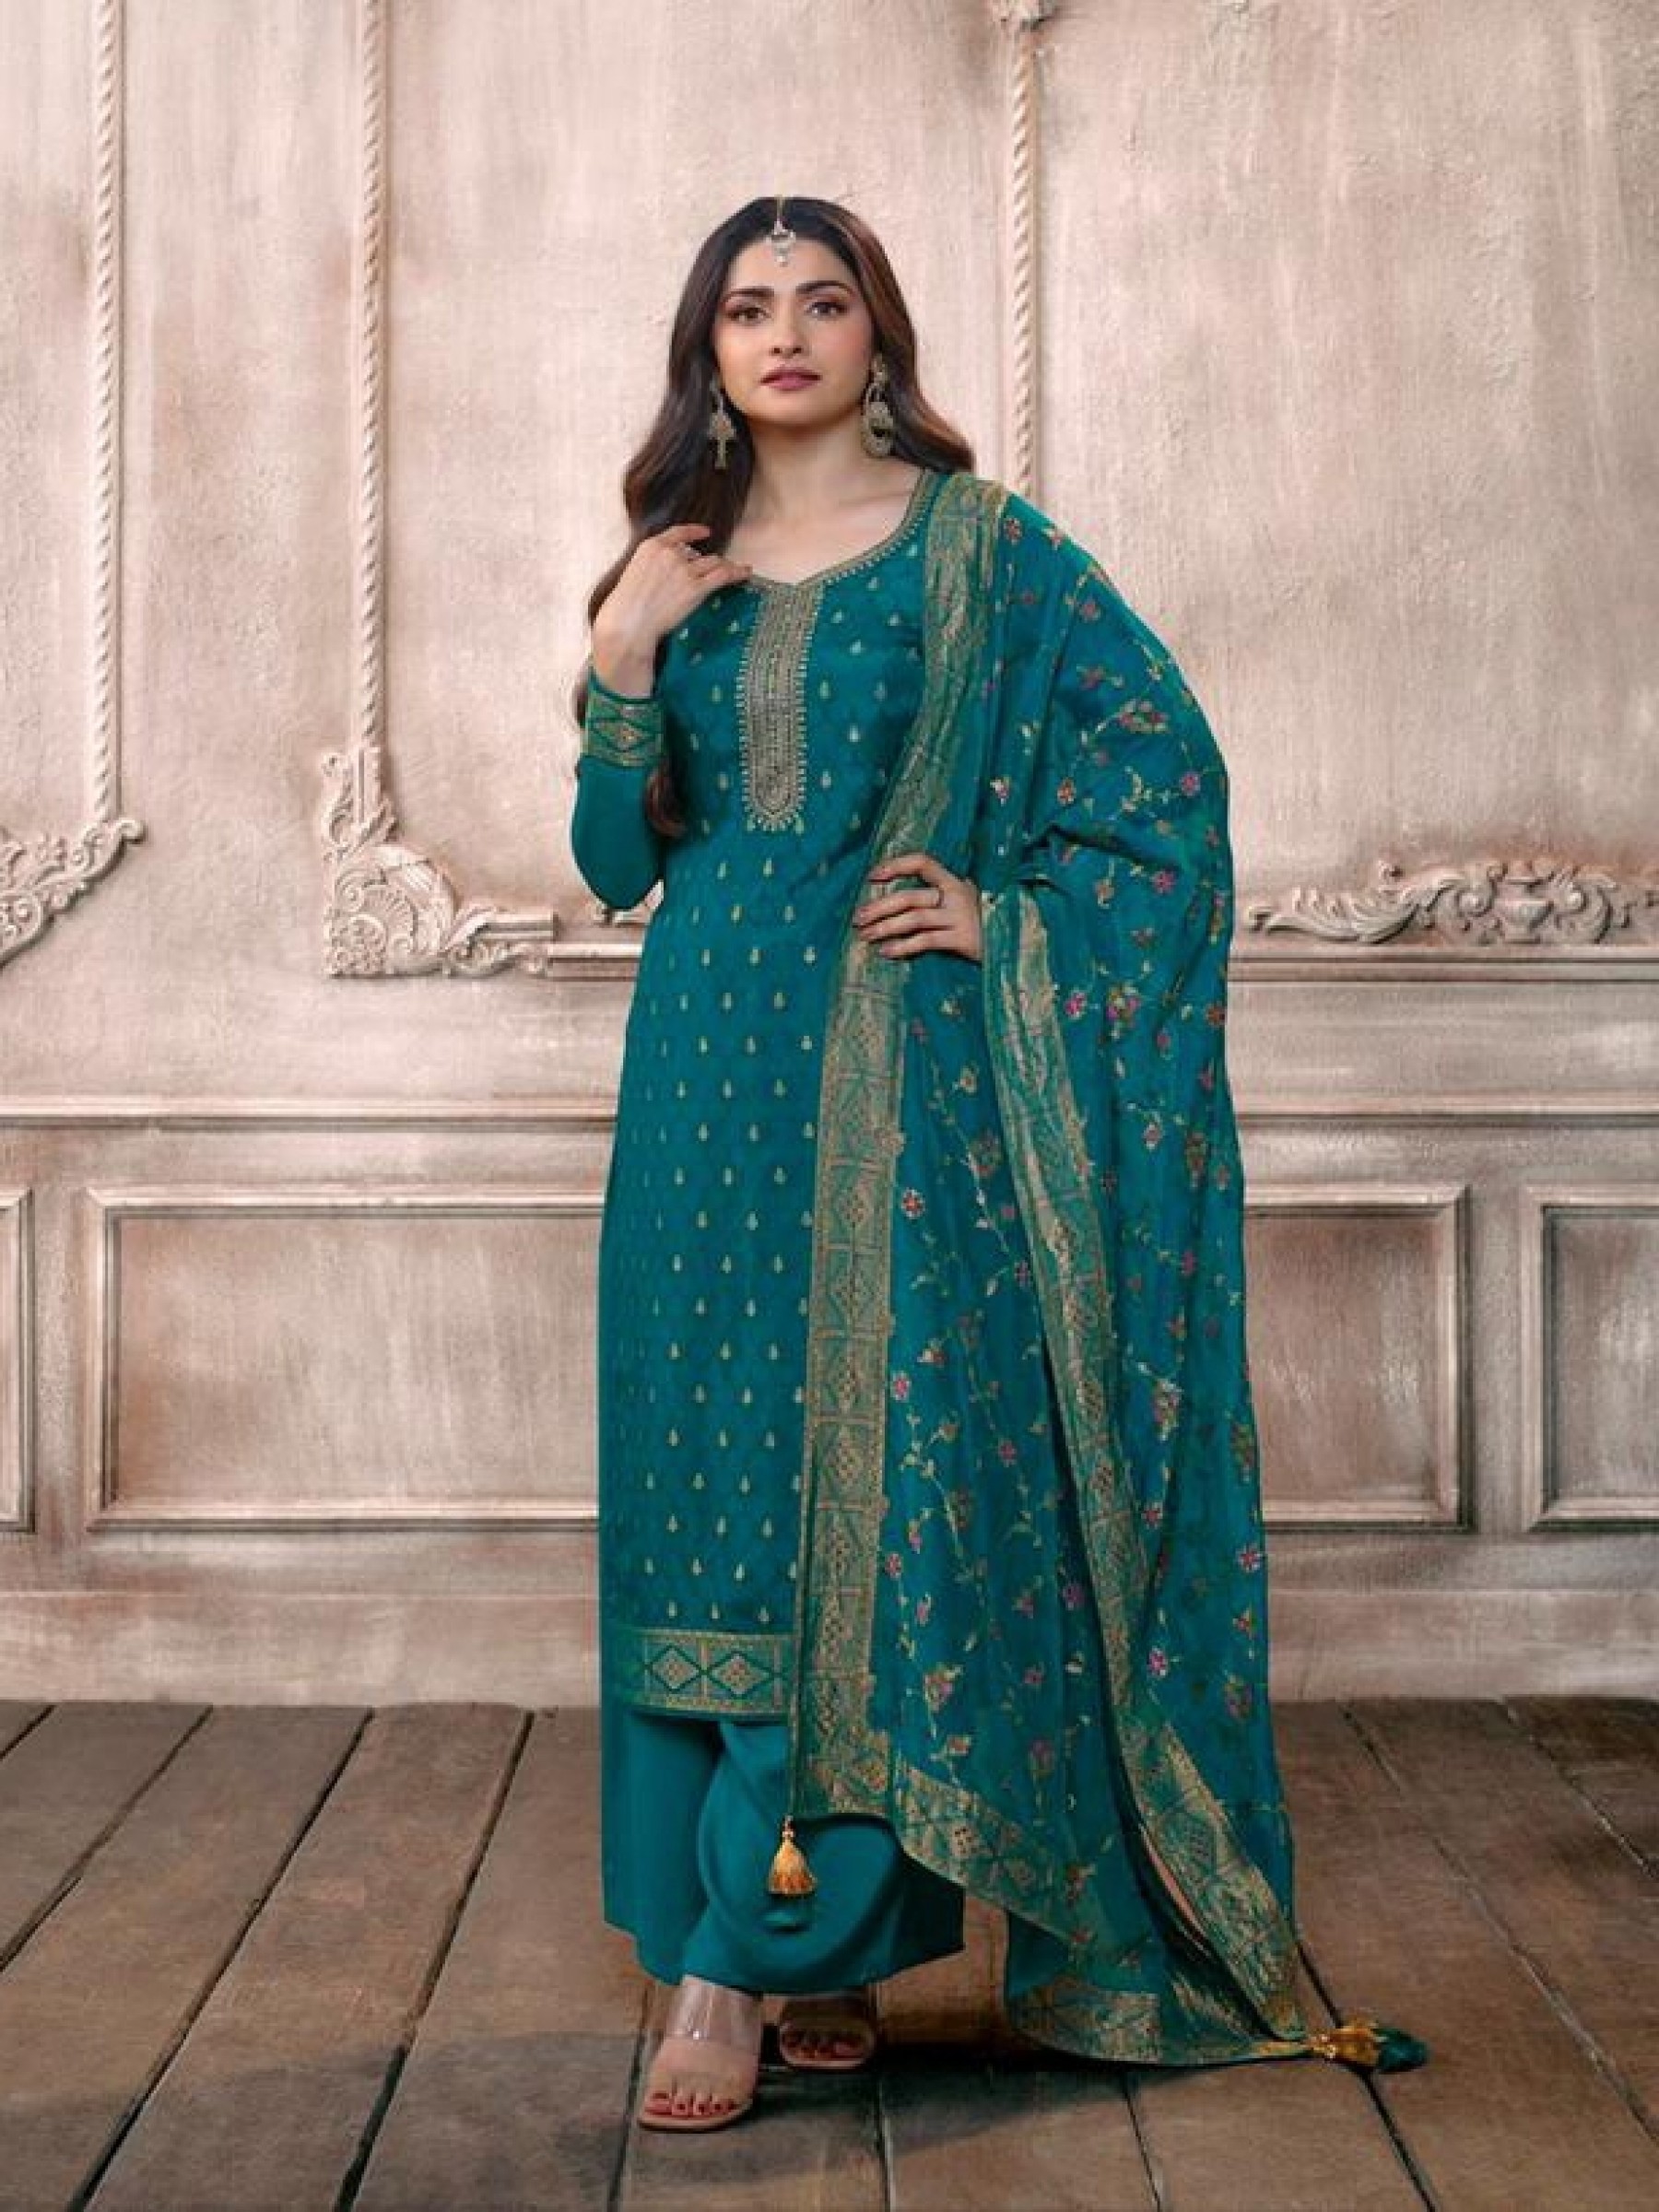 Pure Dola Jacquard Silk Party Wear Suit in Teal Blue Color with Embroidery Work